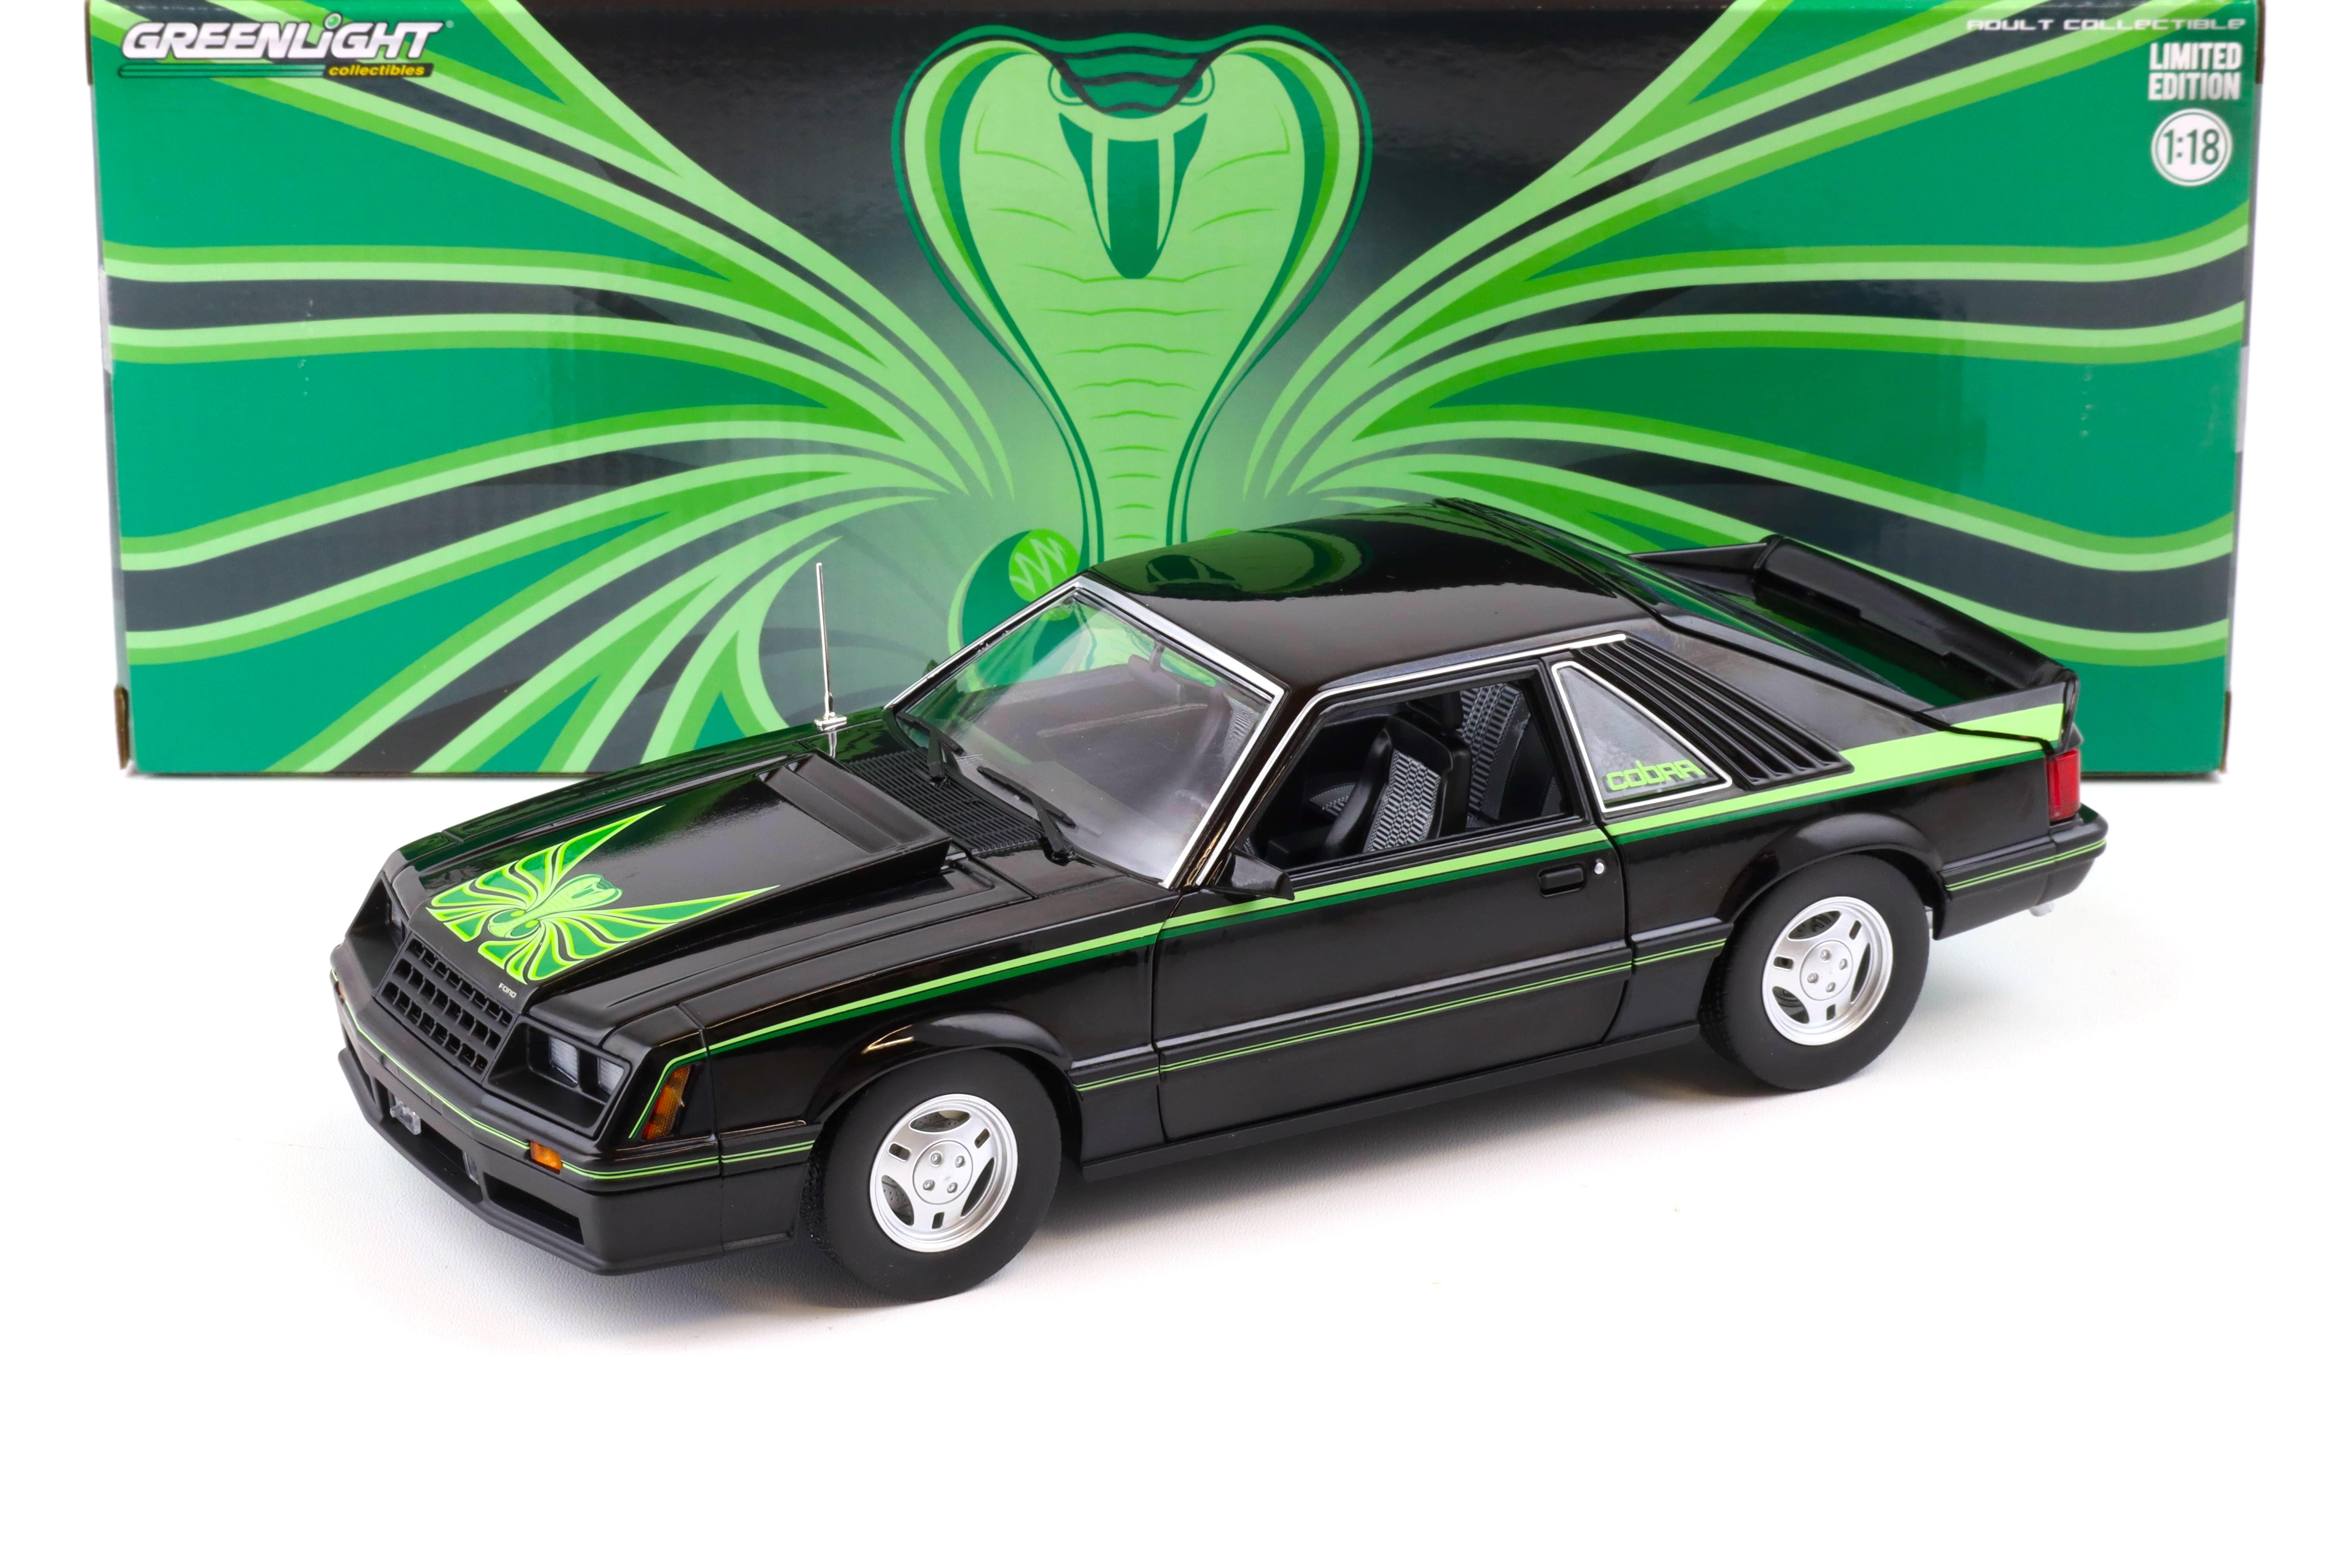 1:18 Greenlight 1980 Ford Mustang Cobra Coupe black/ green